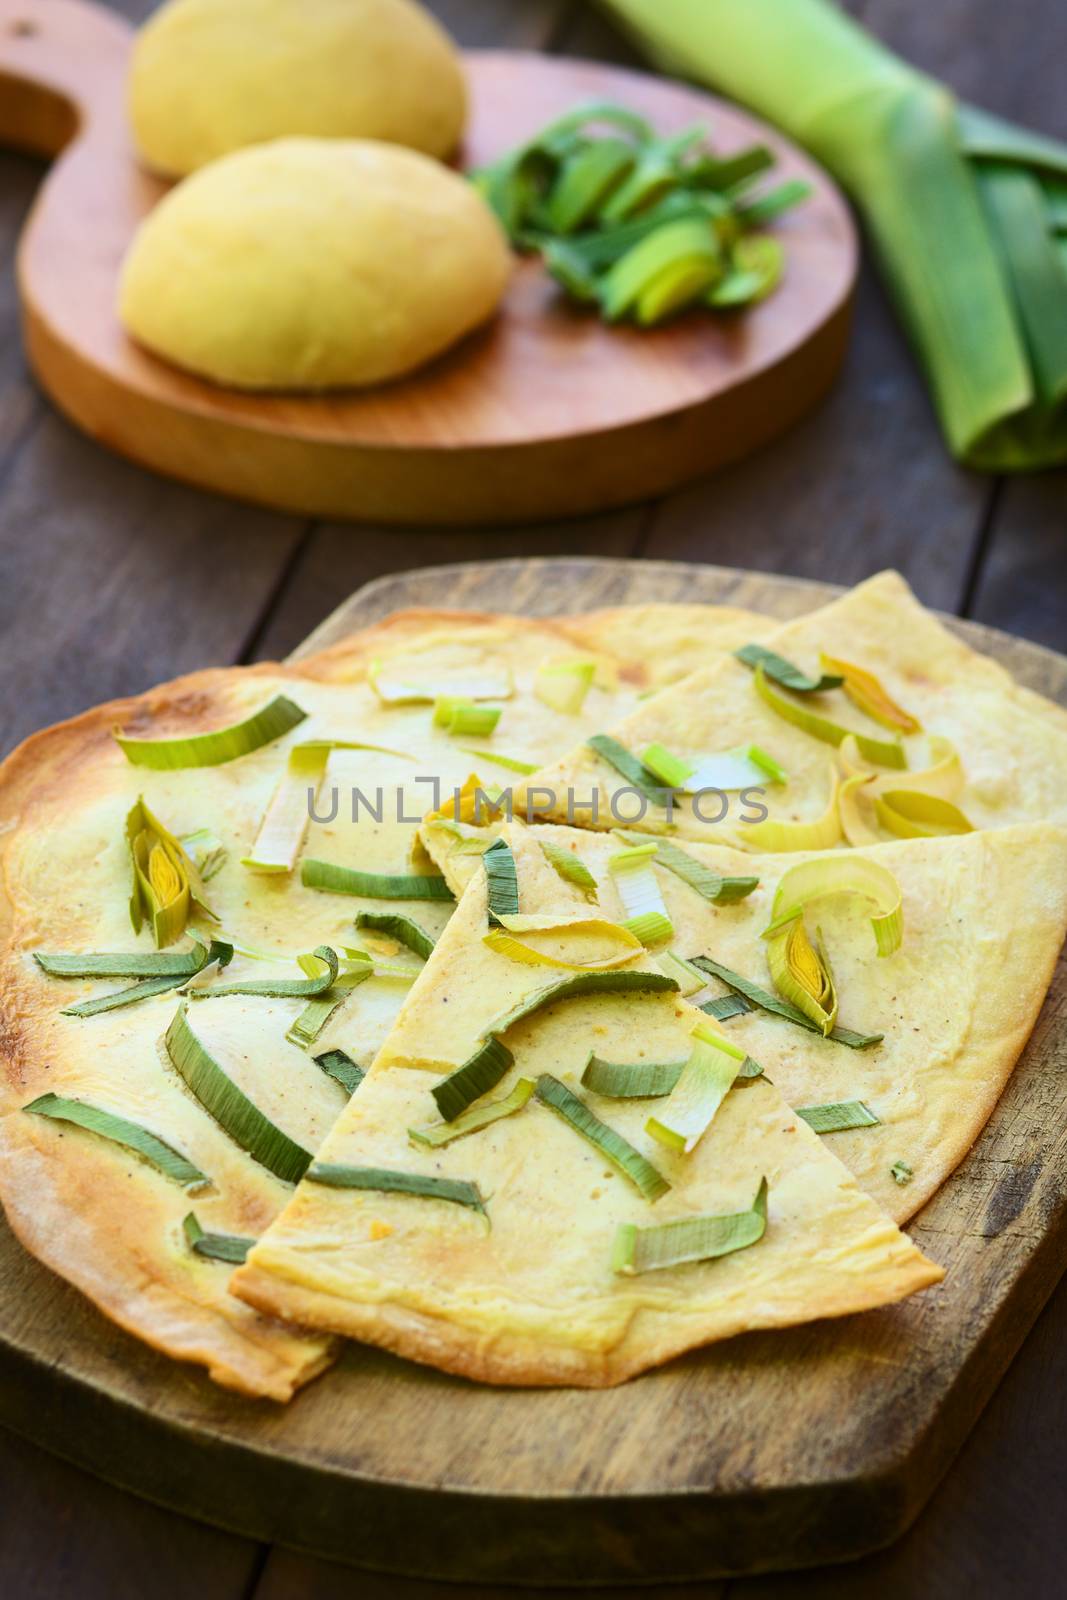 French vegetarian Tarte Flambee made of thin bread dough with a cream and leek topping, served on wooden board with ingredients in the back (Selective Focus, Focus on the upper part of the first piece)  